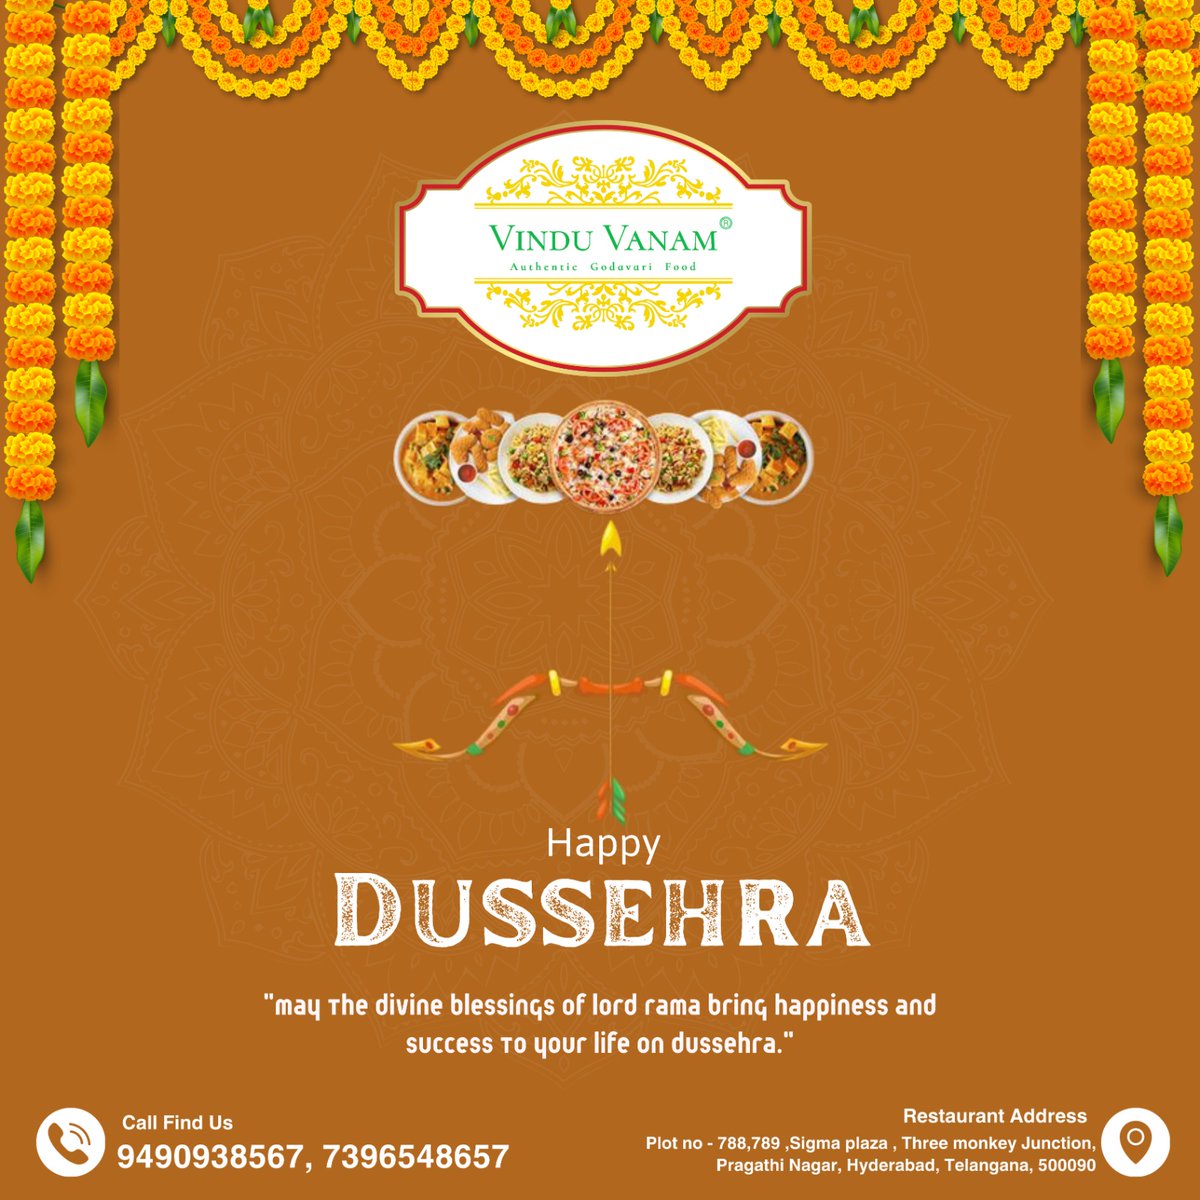 🪔 Celebrate the Triumph of Good over Evil with Vindu Vanam !! 🪔🌟

On this auspicious occasion of Dussehra, we extend our warmest wishes to everyone. 
#DussehraWishes #TriumphOfGoodOverEvil #Vinduvanam #vinduvanamrestaurat #FestivalOfHealth #TriumphOfGoodOverEvil #FestivalOfJoy